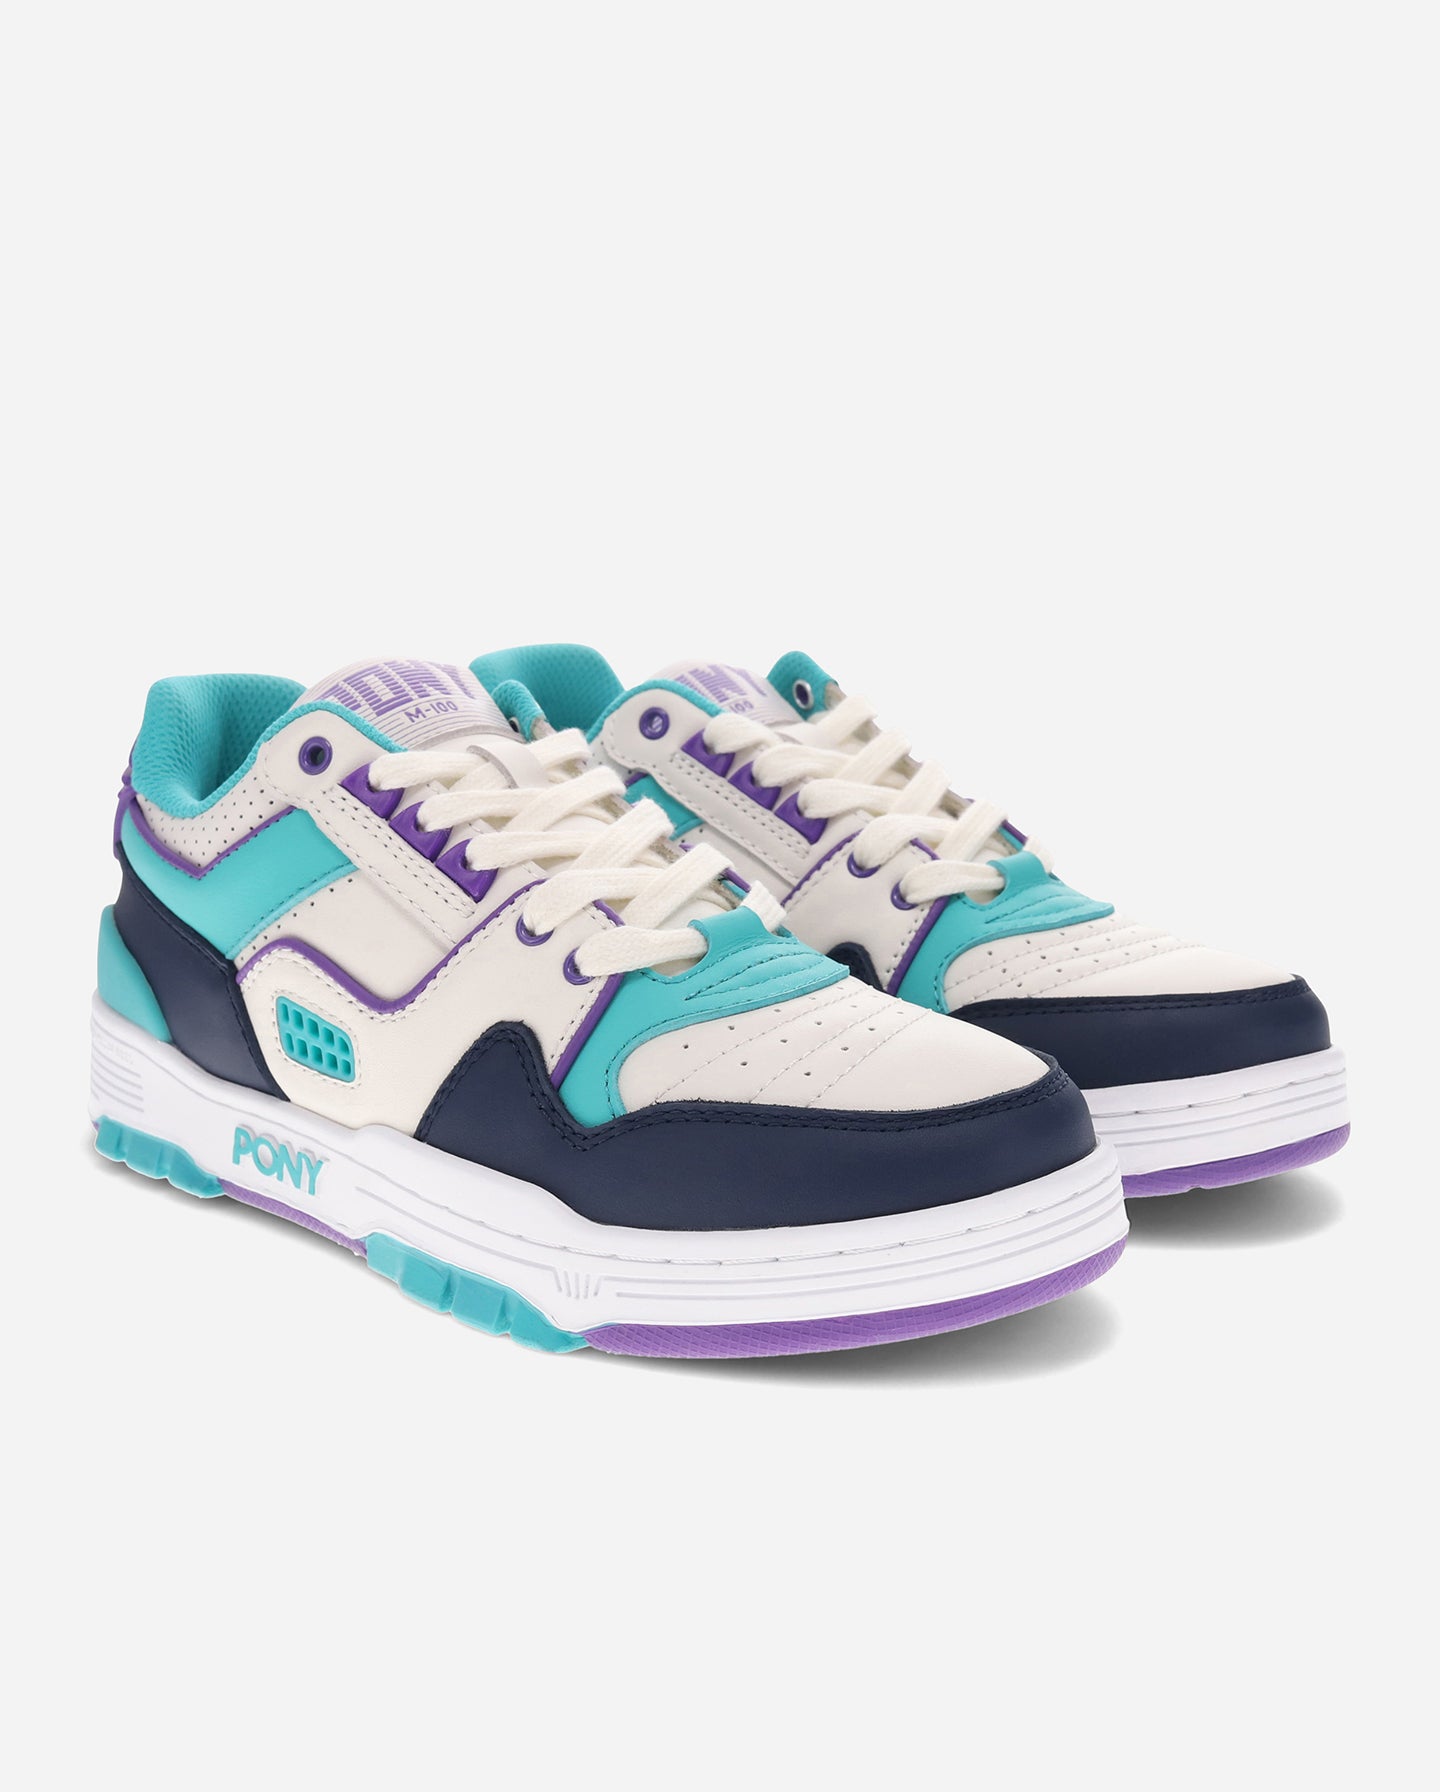 M-100 in navy/white/purple/teal – (front side/unisex